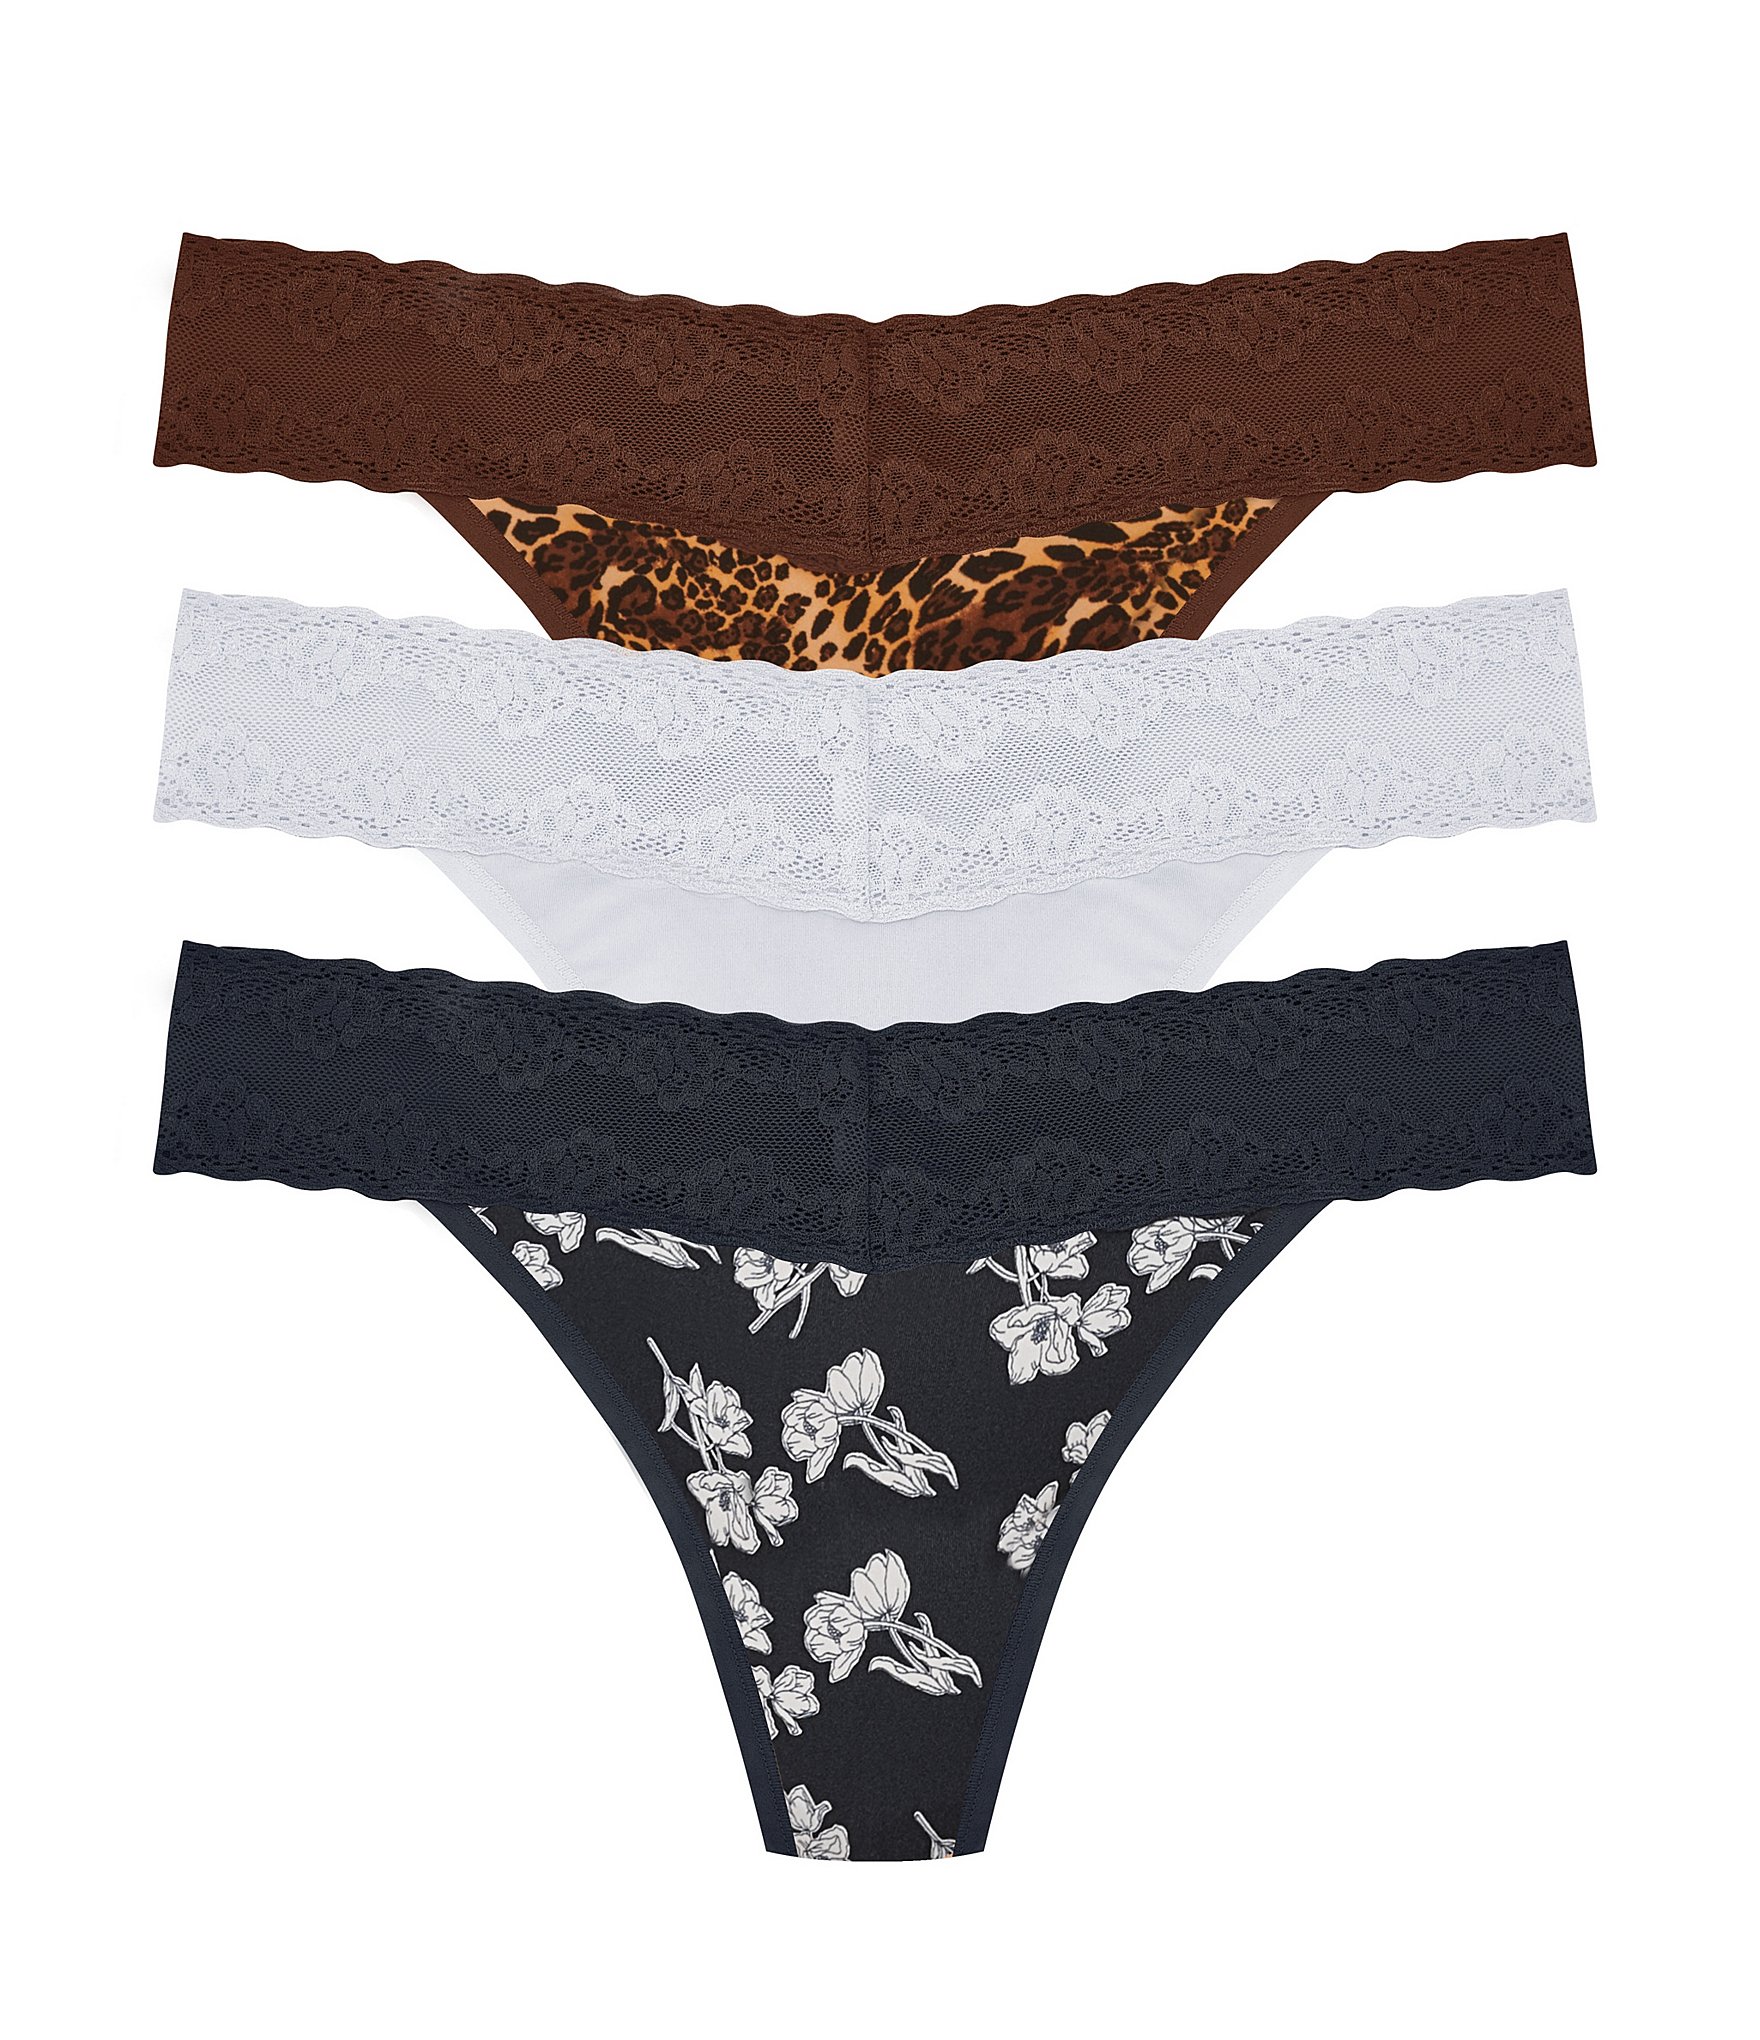 Buy Bliss Perfection Maternity Brief and Underwear Gifts - Shop